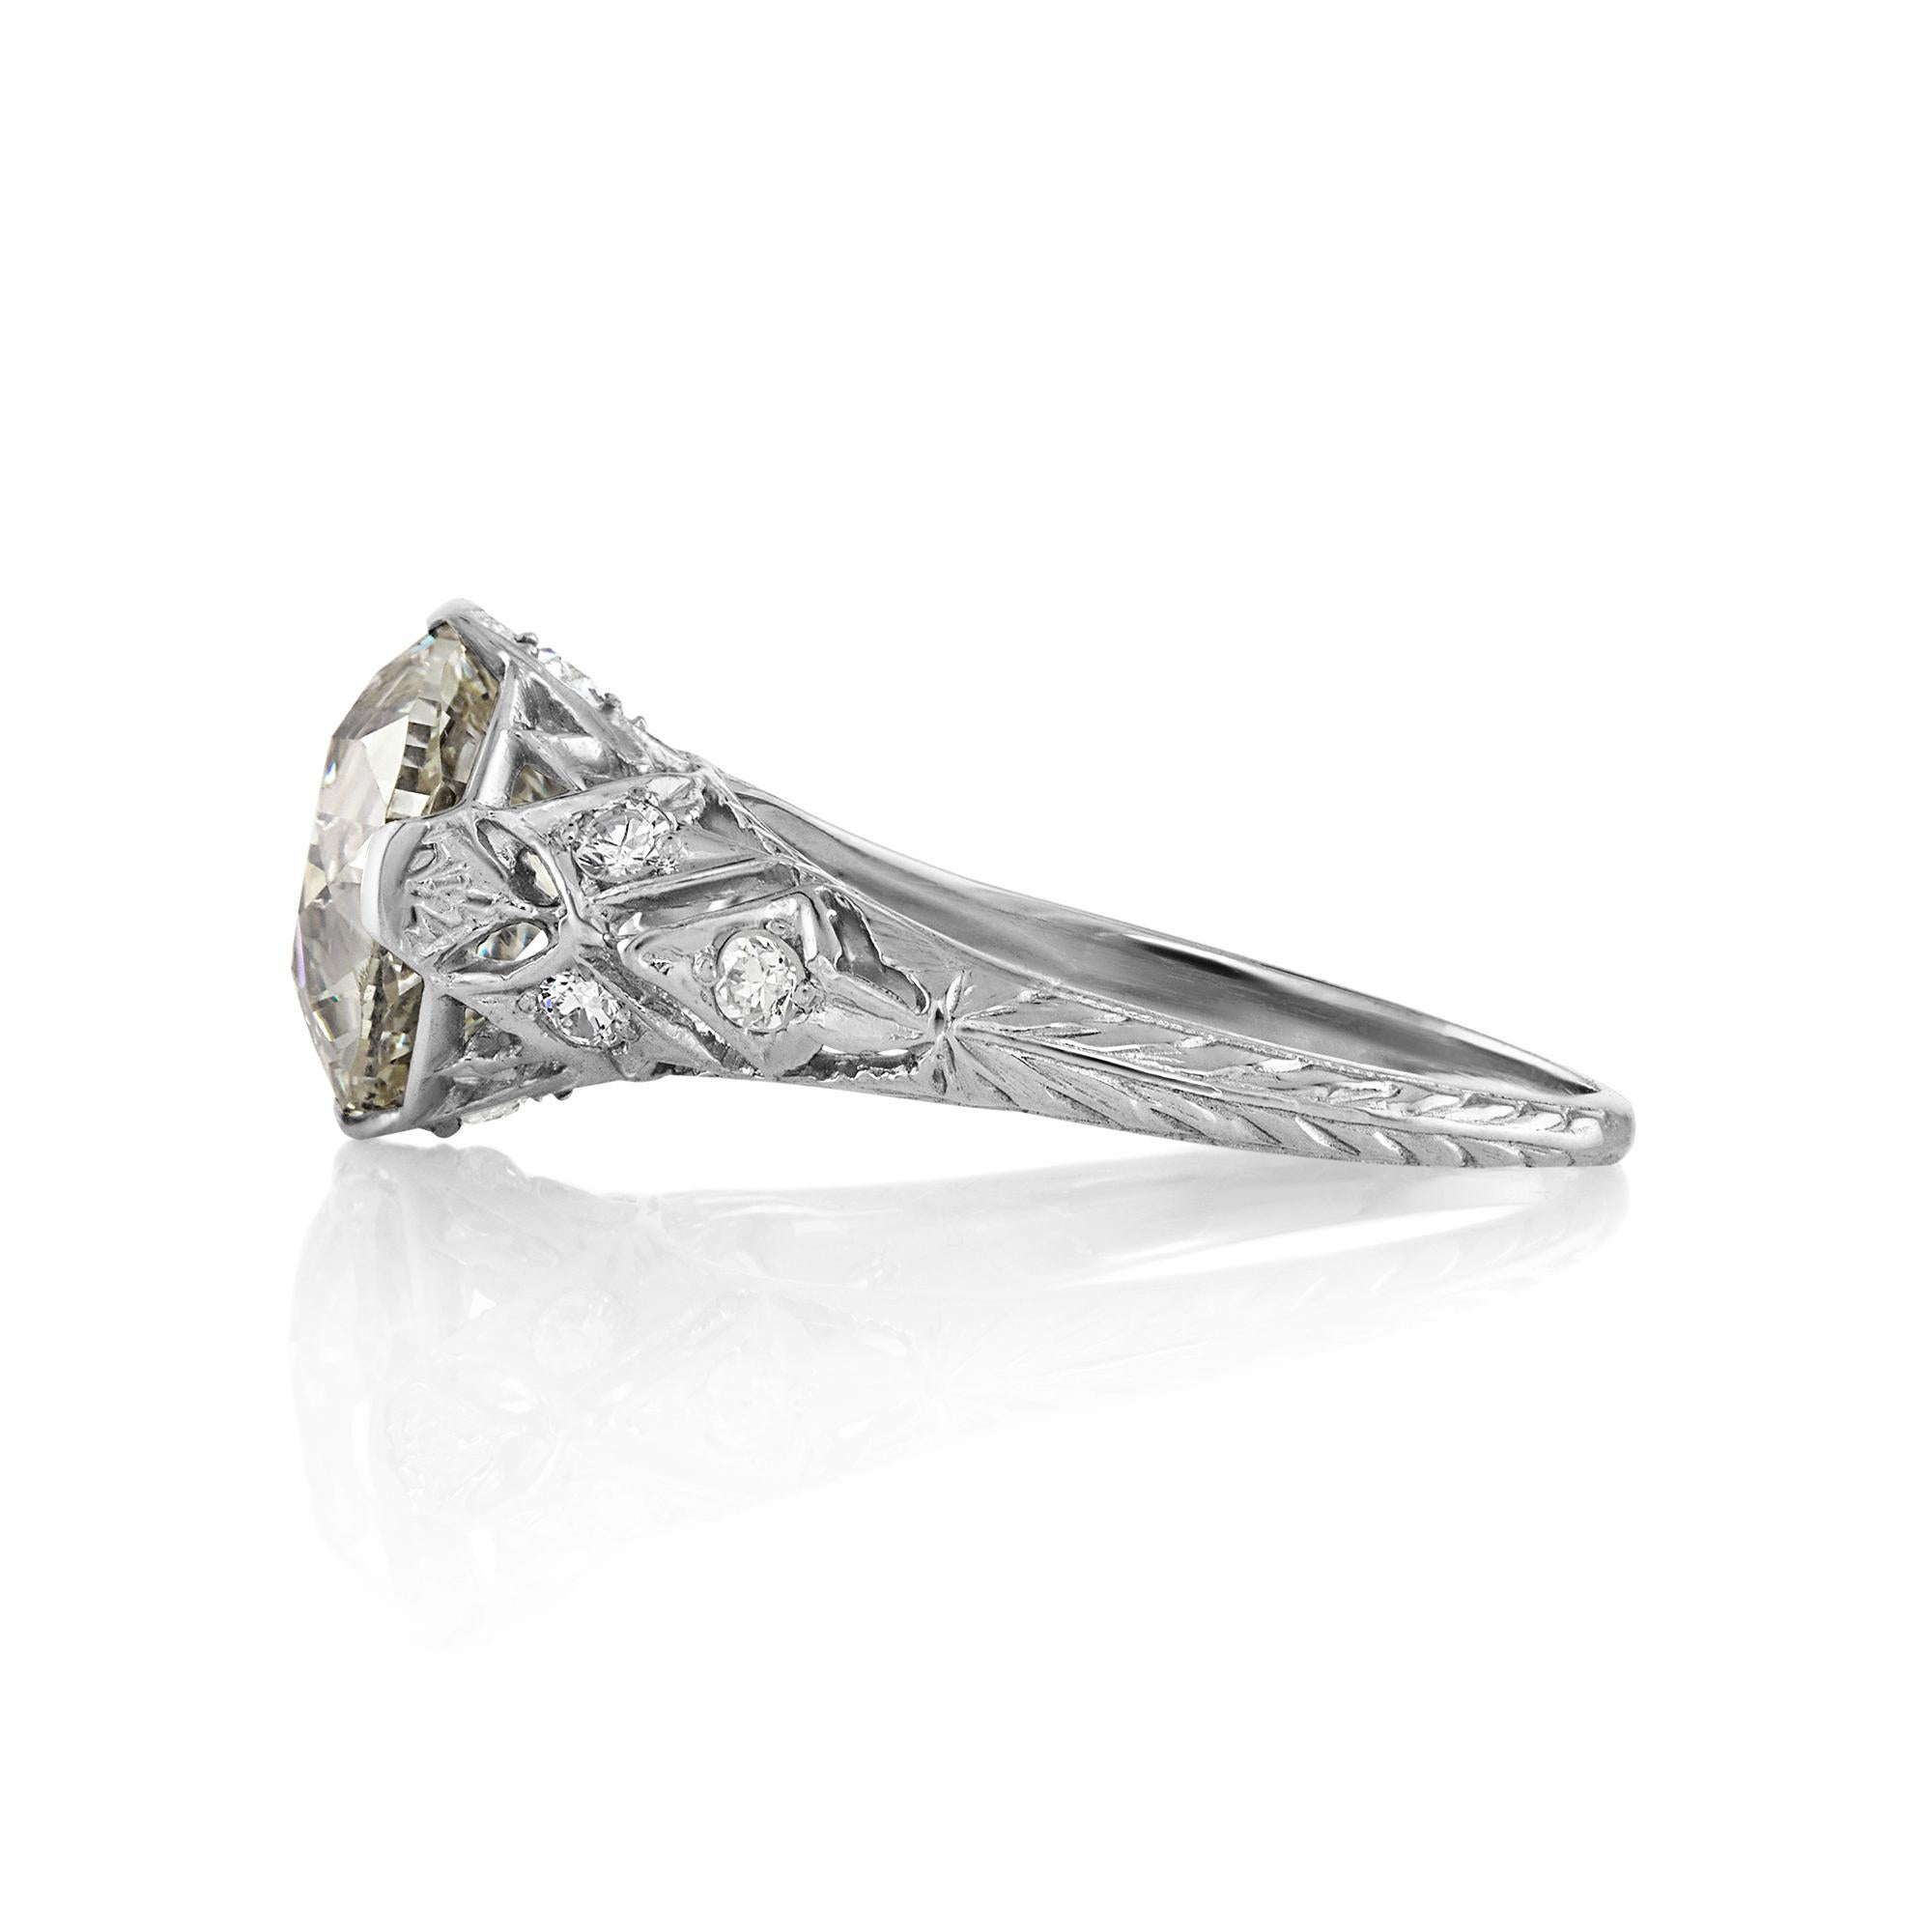 Antique Vintage GIA 4..45ctw OLD EUROPEAN Diamond Platinum Edwardian Ring.

Edwardian Rings represent some of the finest examples of diamond, platinum jewelry in existence. Edwardian Diamond jewels were made to look as light and delicate as